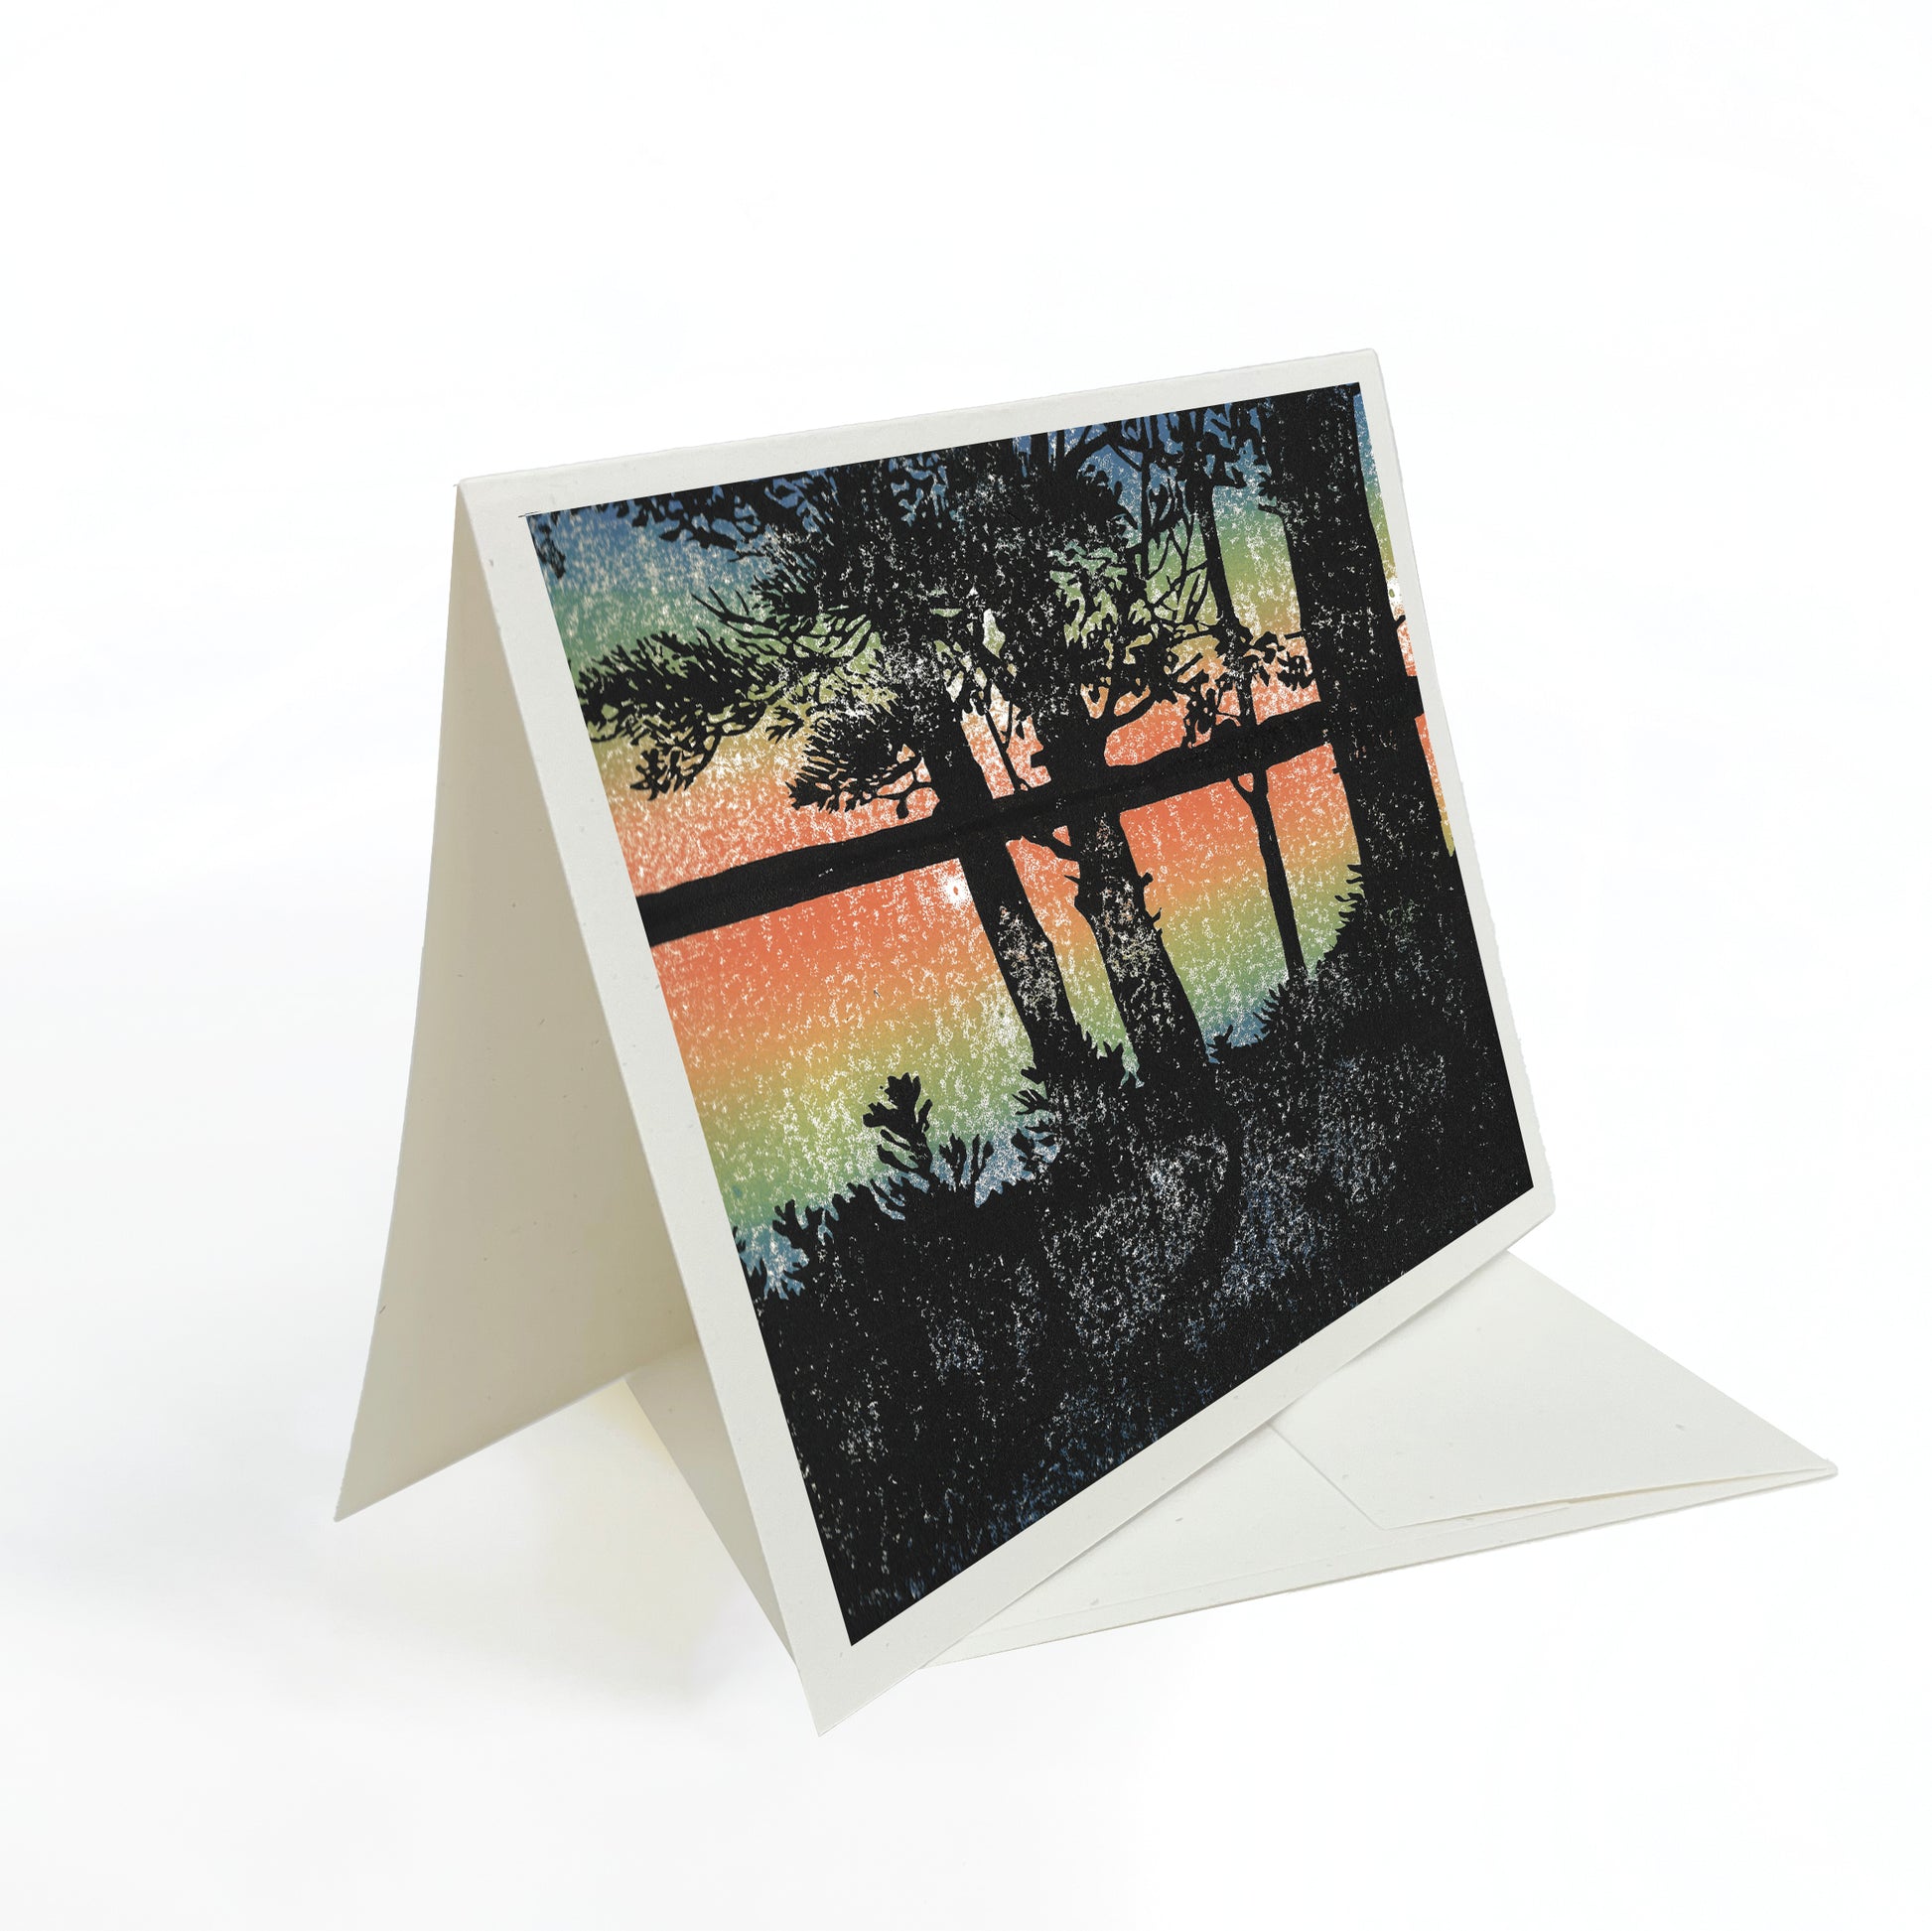 A casually elegant card featuring Michigan landscapes art by Natalia Wohletz of Peninsula Prints titled Sunset.